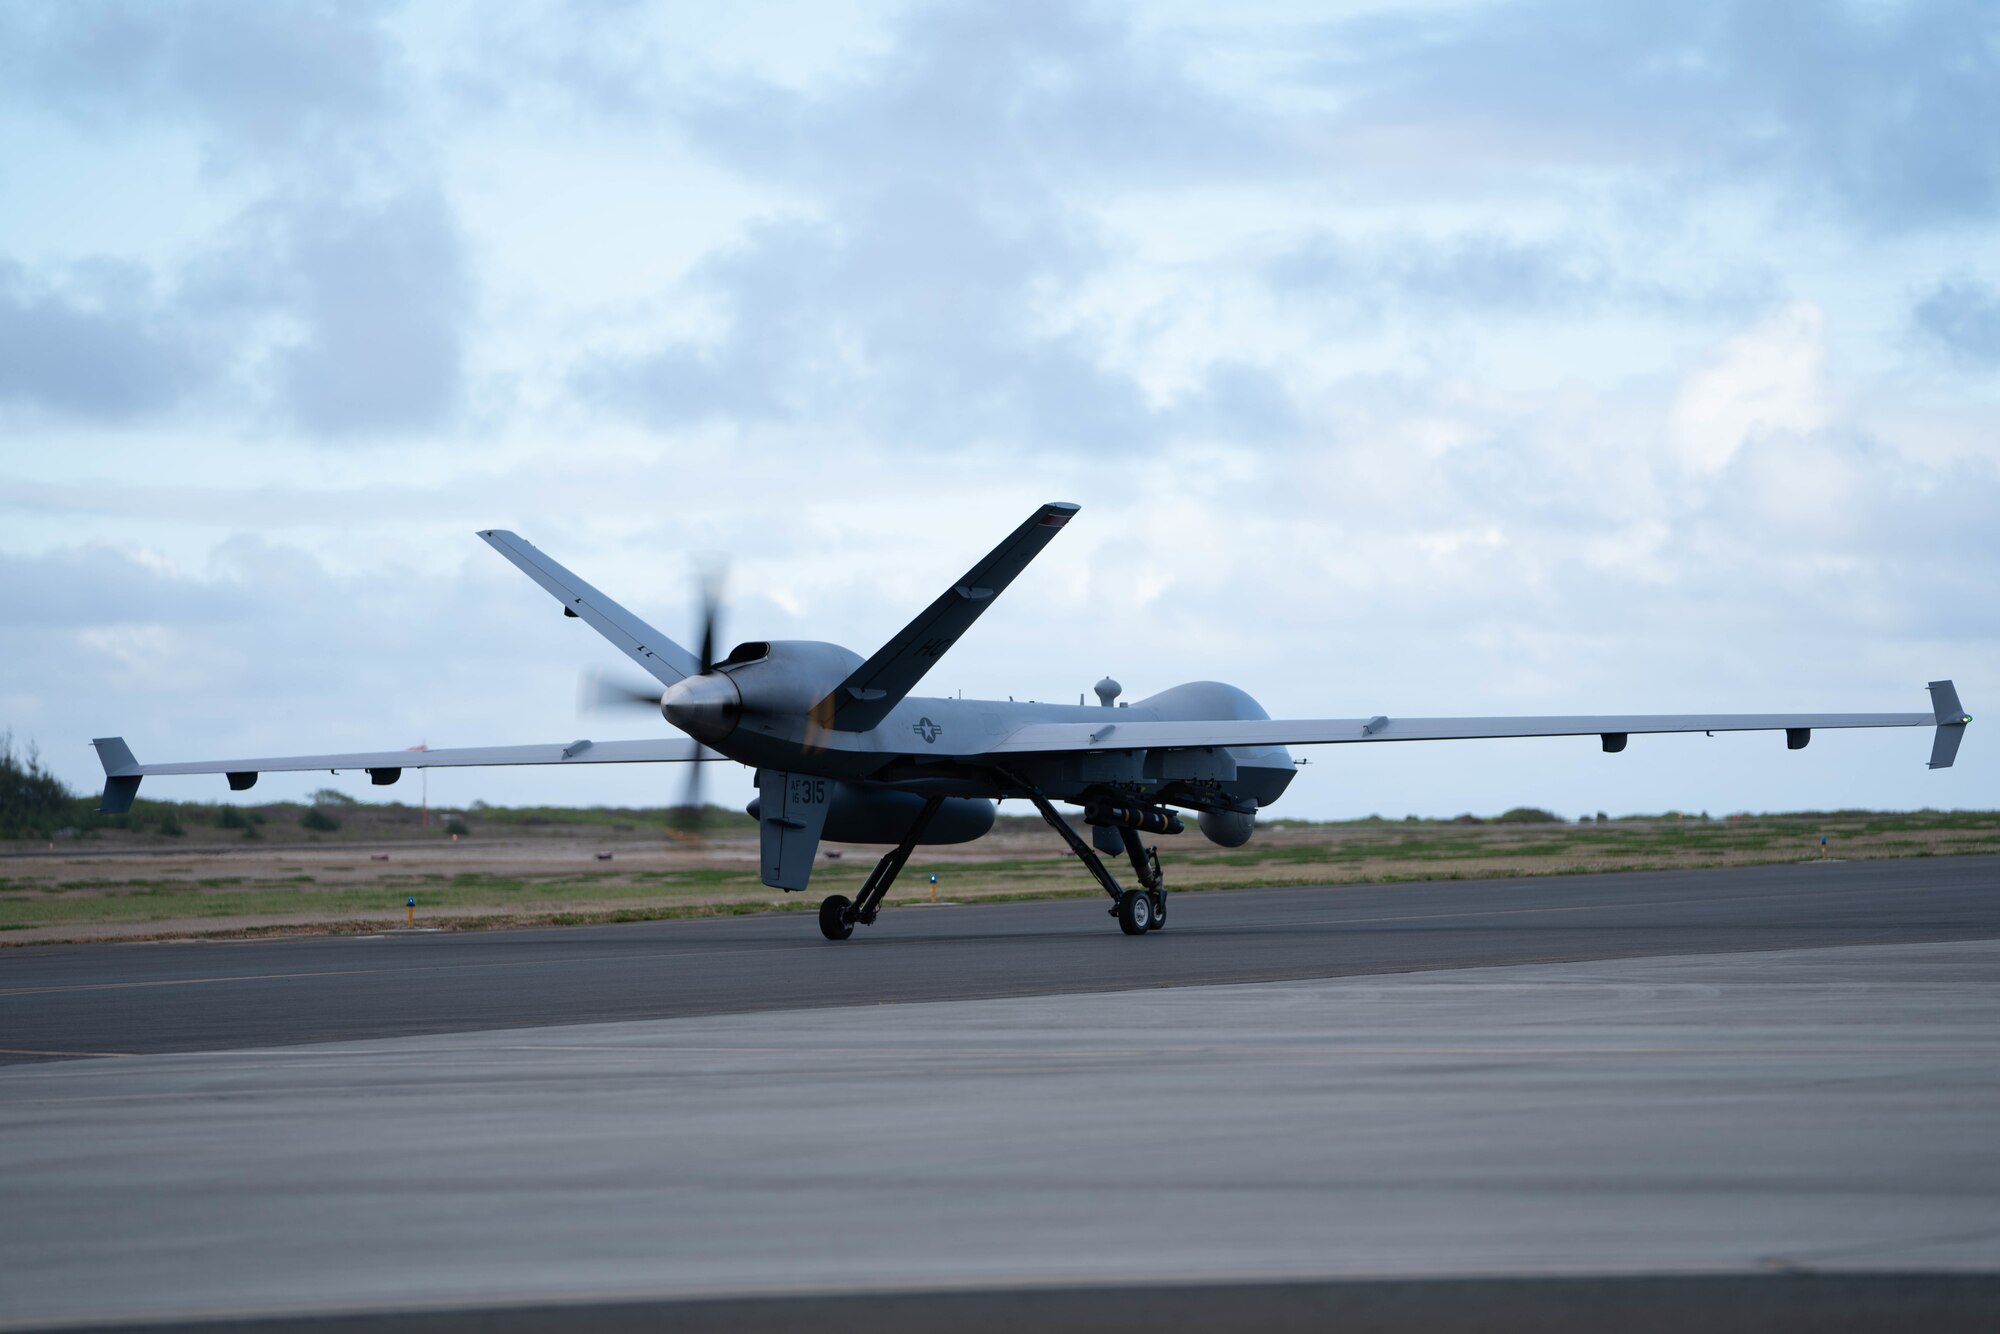 A U.S. Air Force MQ-9A Reaper, a remotely piloted aircraft, lands at Marine Corps Air Station Kaneohe Bay, Hawaii. Rim of the Pacific (RIMPAC) 2022 military forces from Australia, Canada, Malaysia and the U.S., fired upon and sunk the decommissioned ex-USS Rodney M. Davis (FFG 60), July 12, during a sinking exercise (SINKEX) to gain proficiency in tactics, targeting and live firing against a surface target at sea.